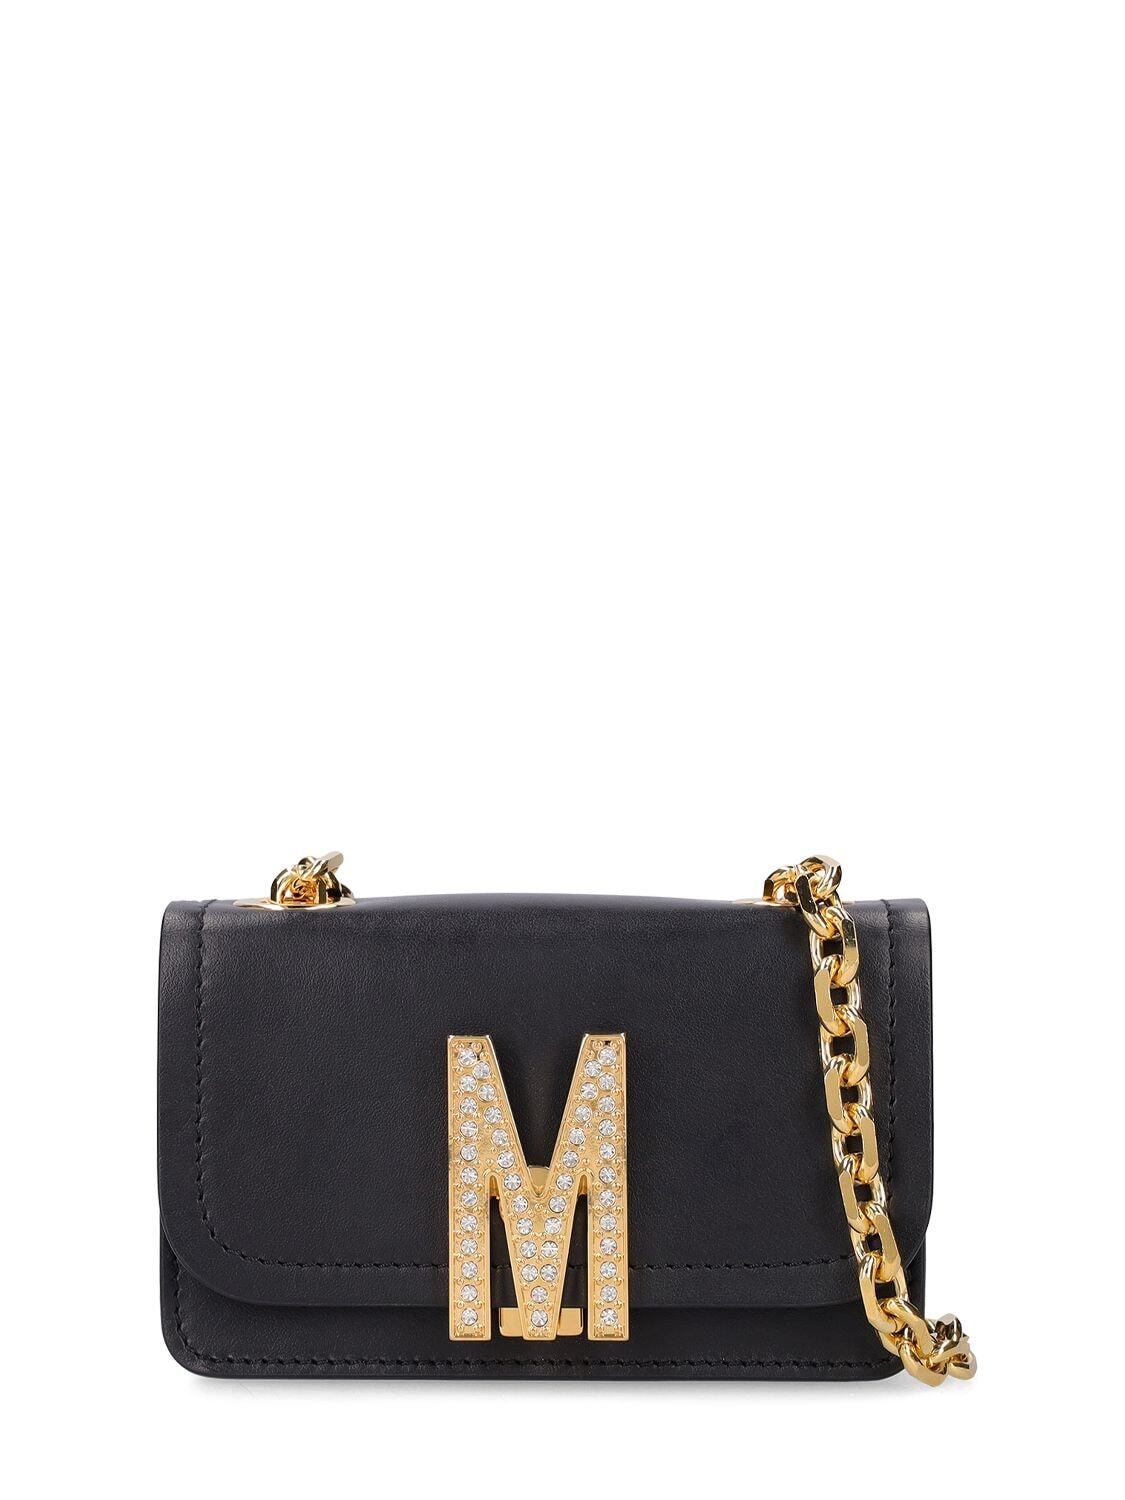 MOSCHINO Leather Shoulder Bag in black